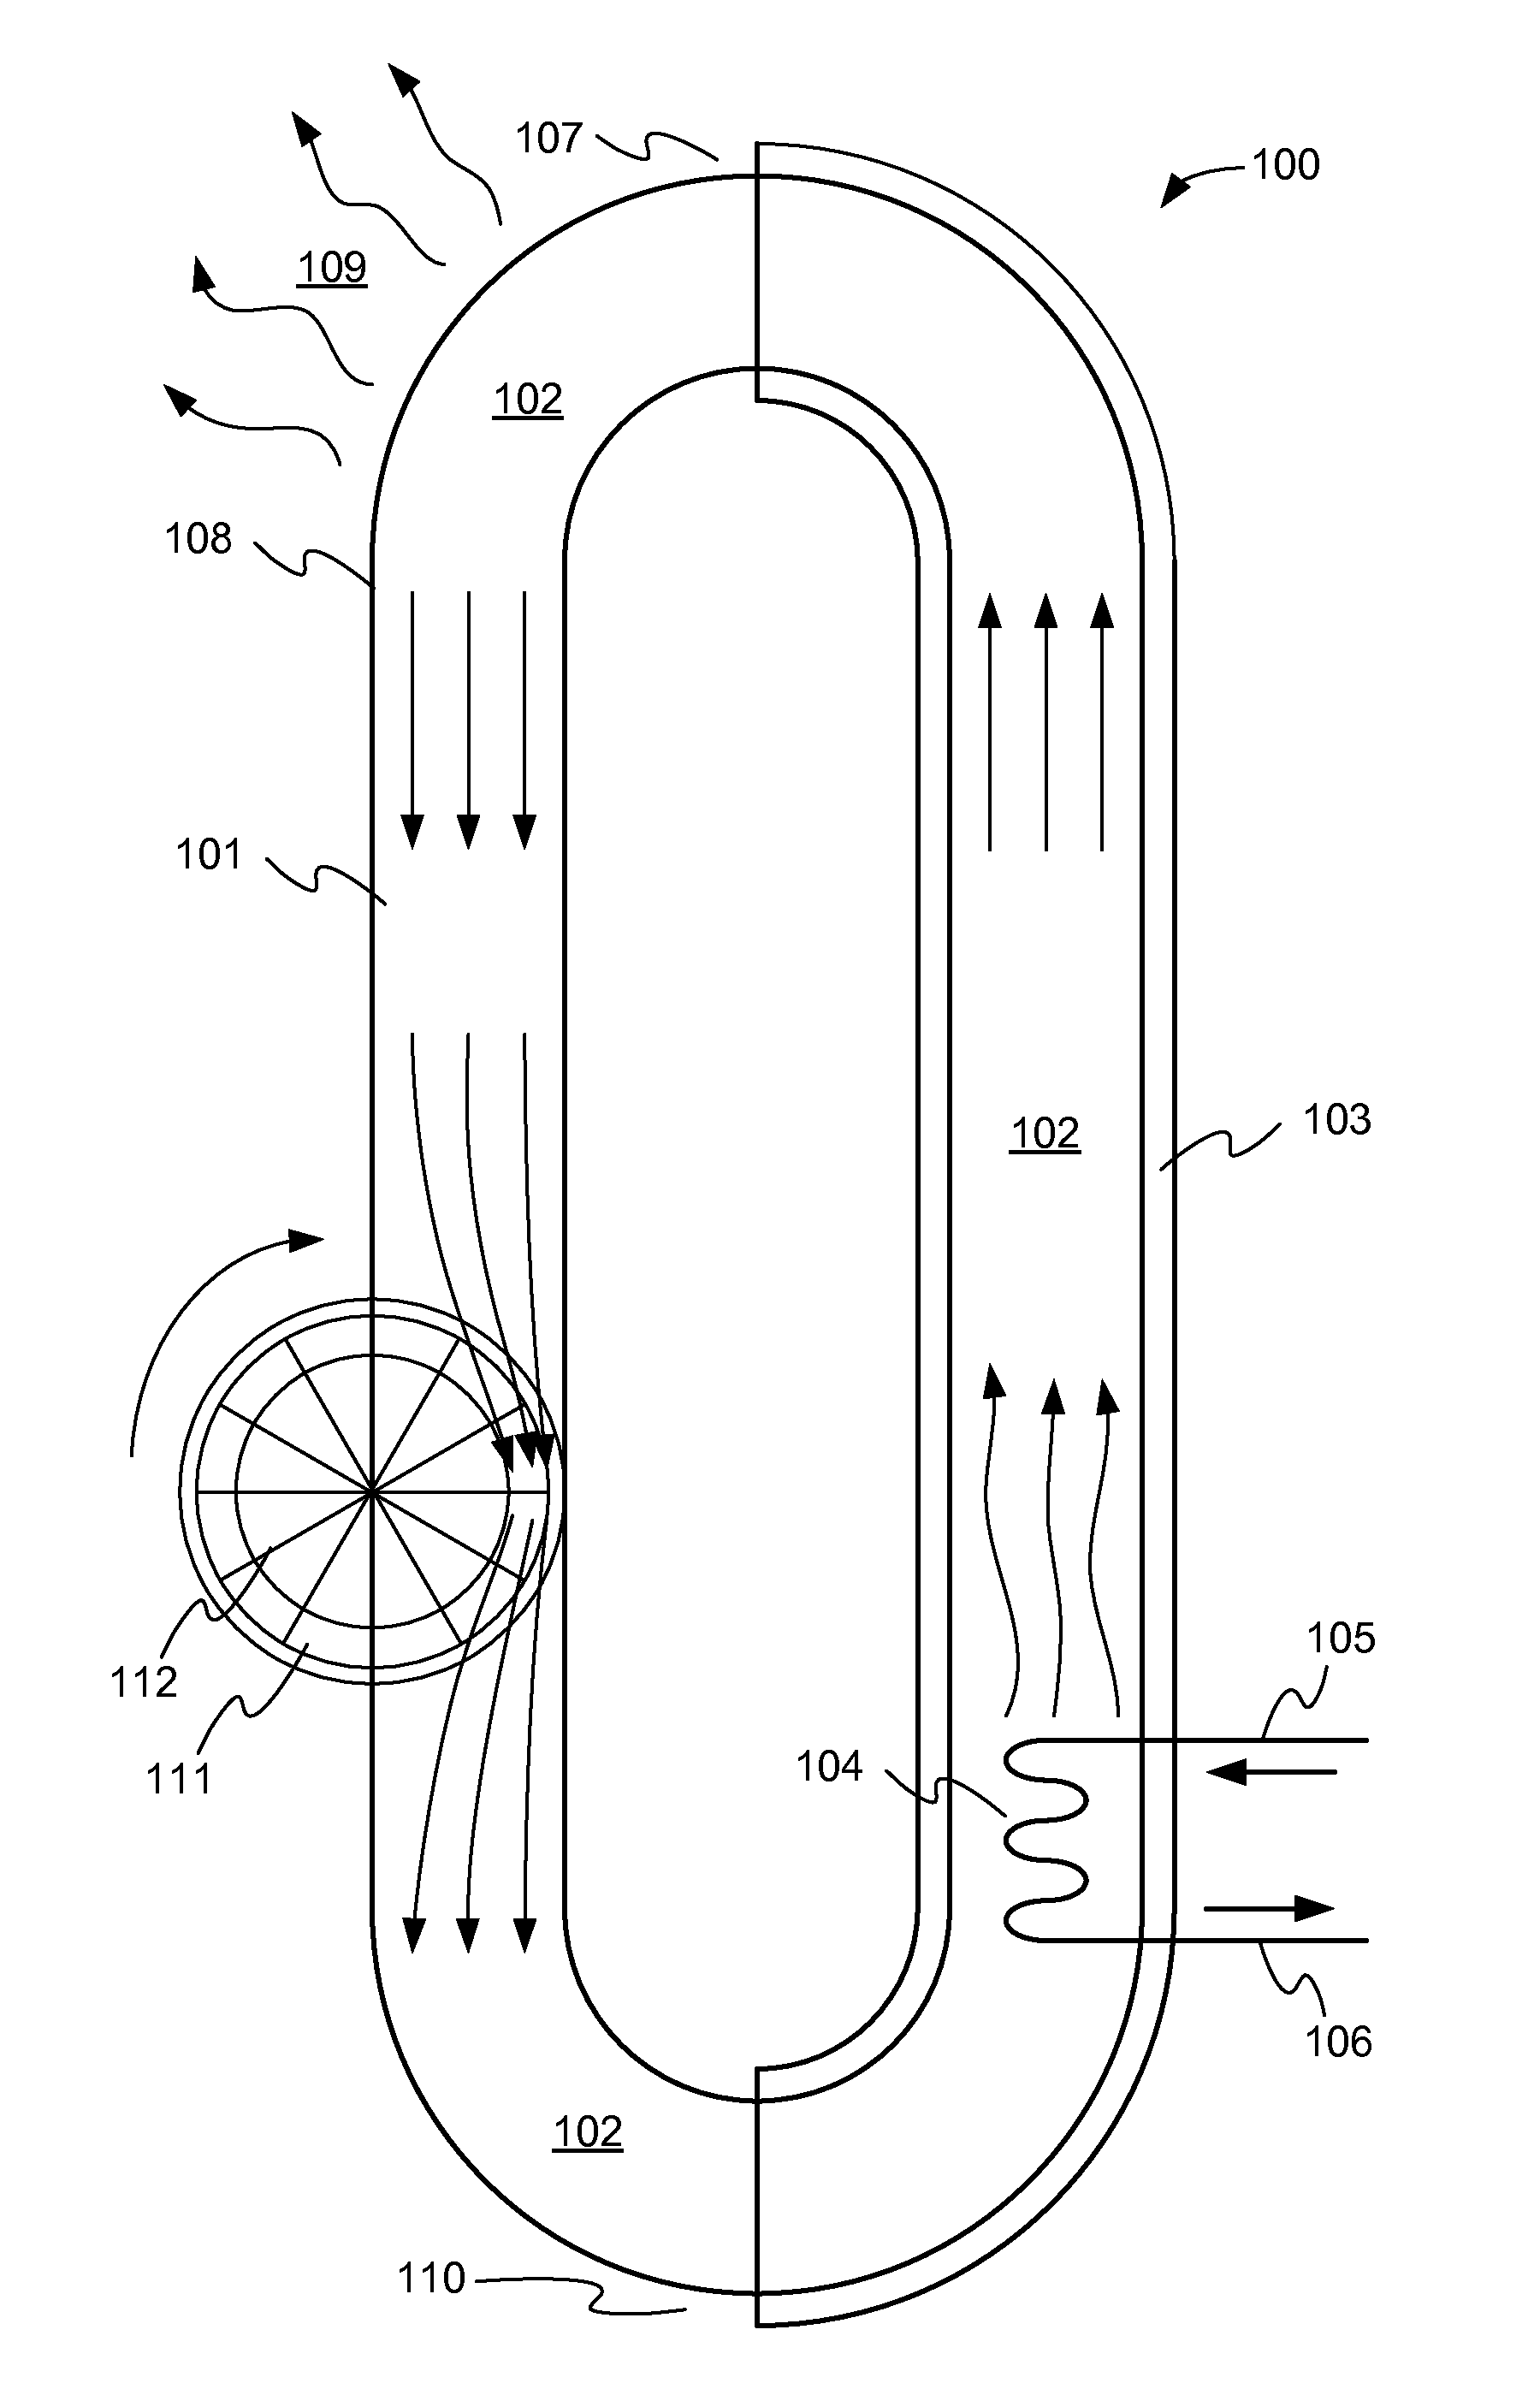 Power generation device and method